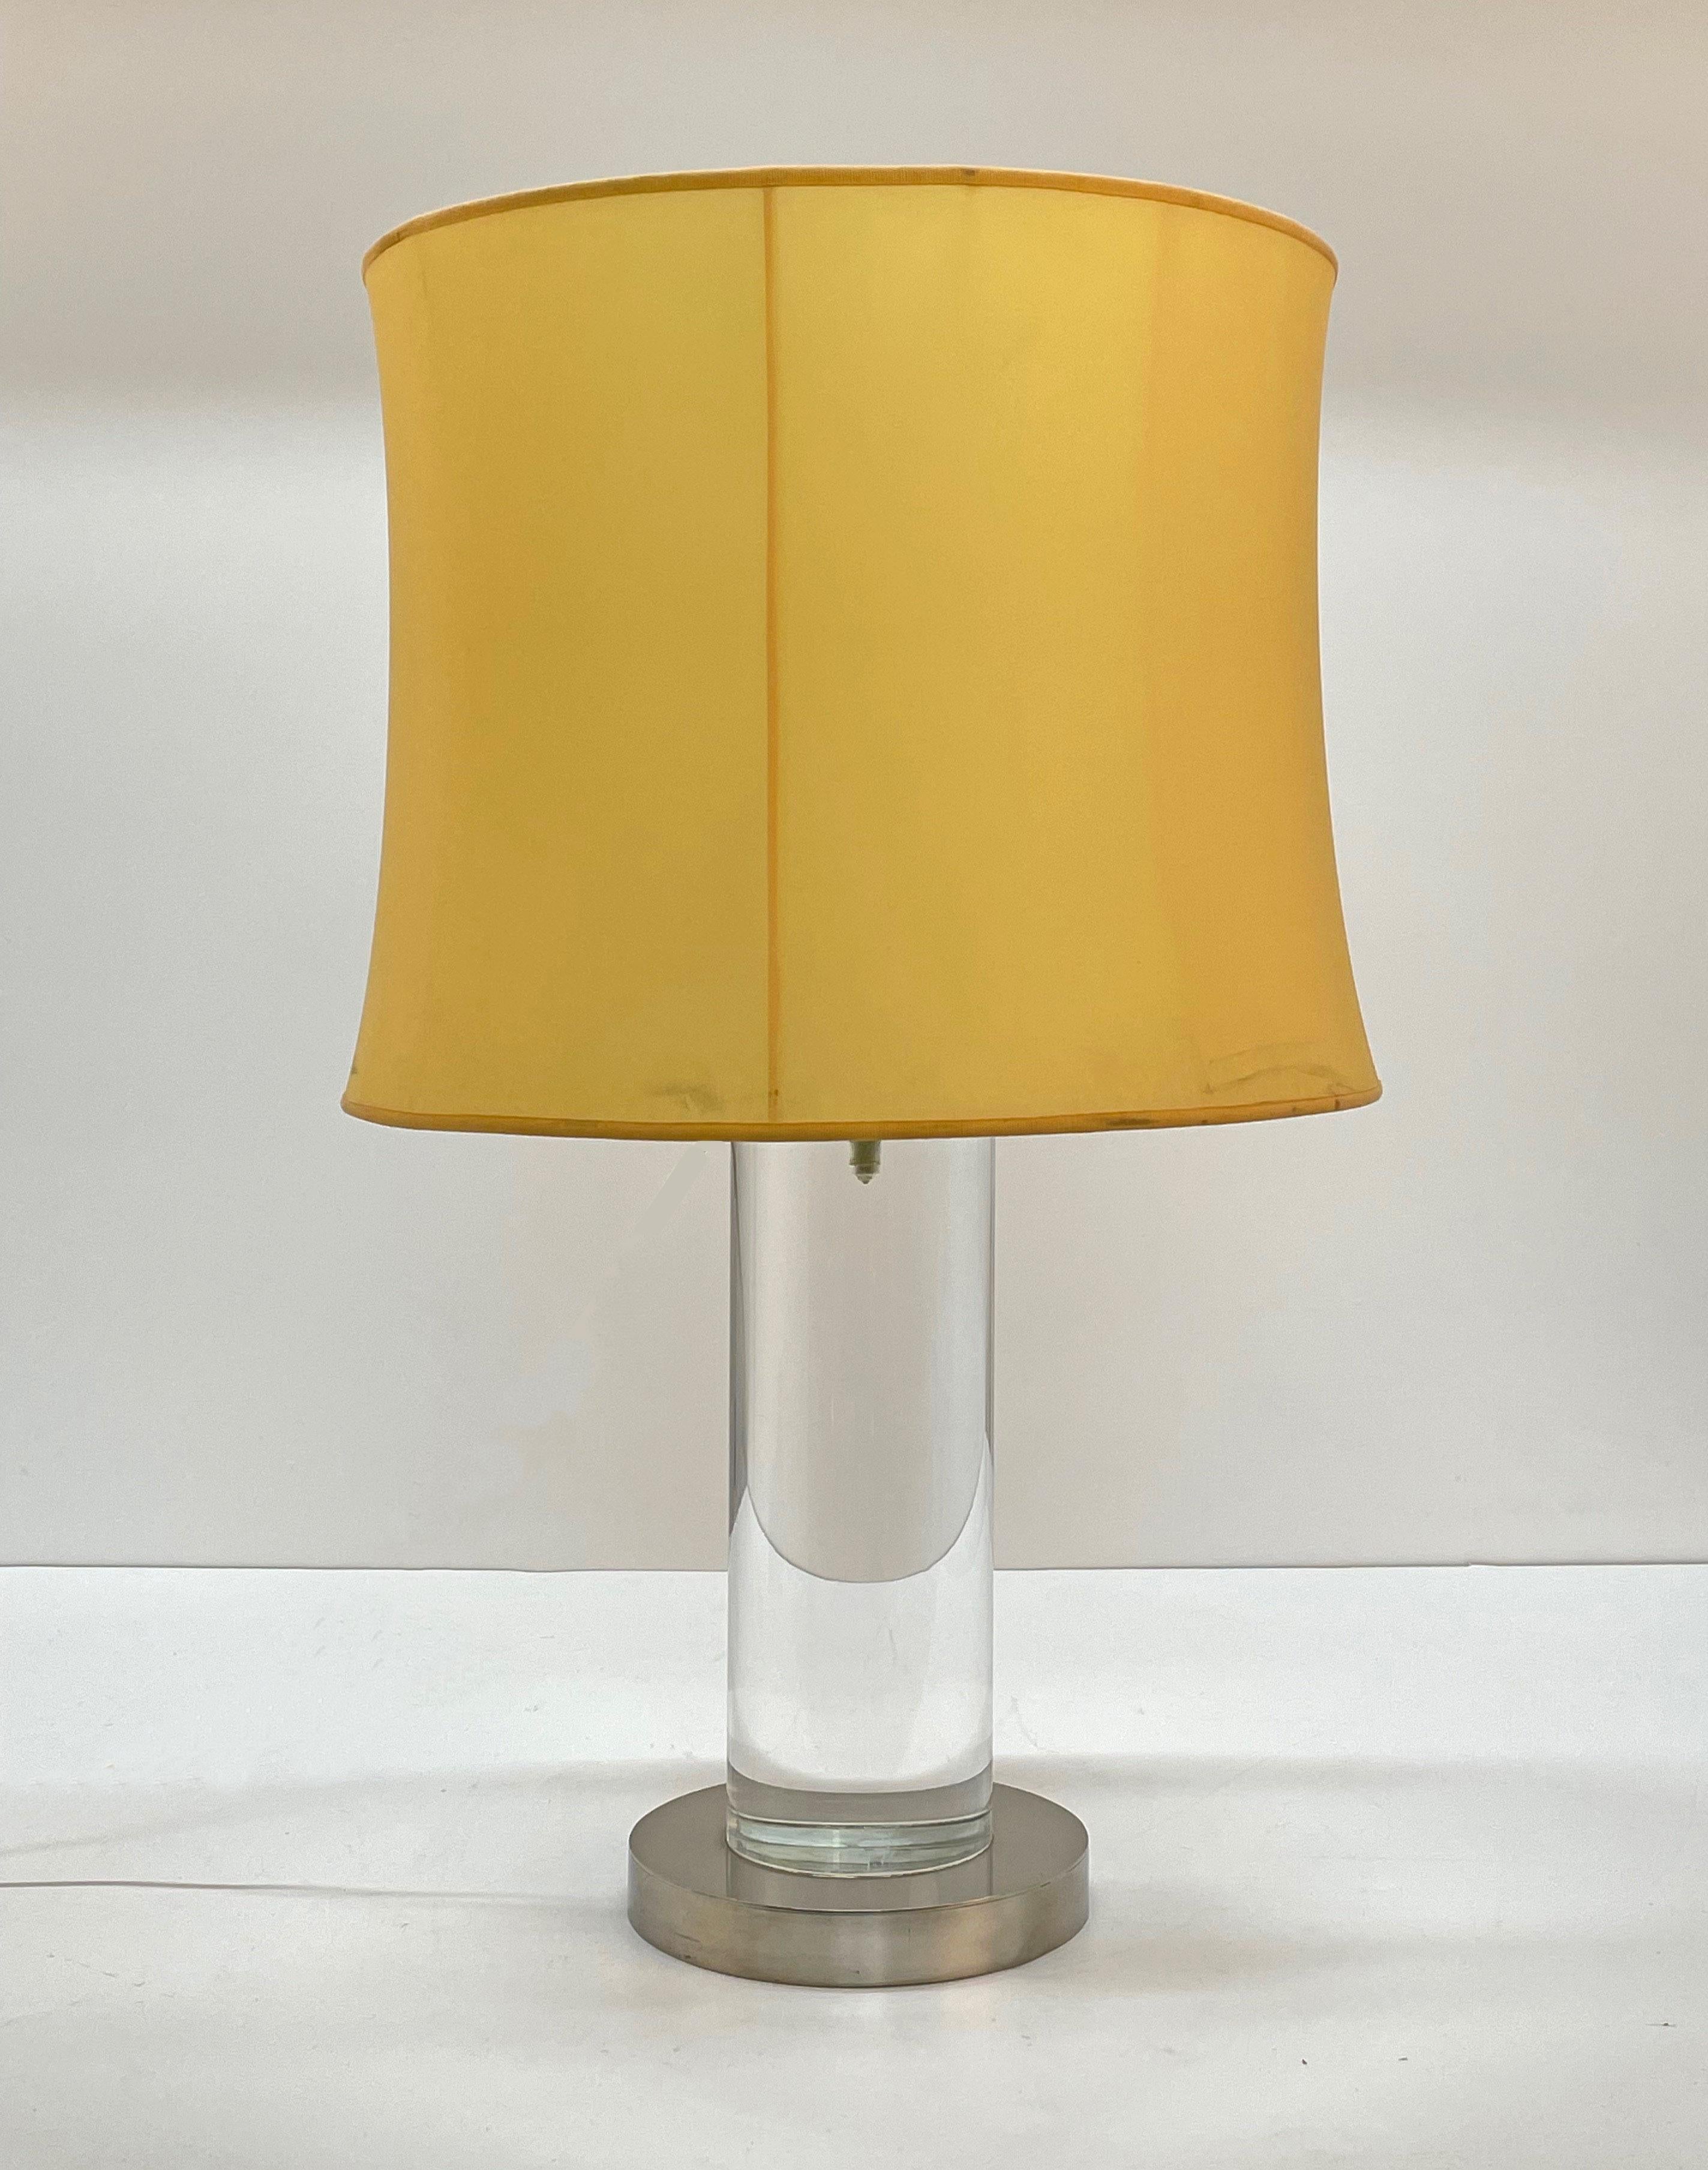 Romeo Rega Midcentury Italian Table Lamp with Lucite Column and Brass Base 1970s For Sale 1